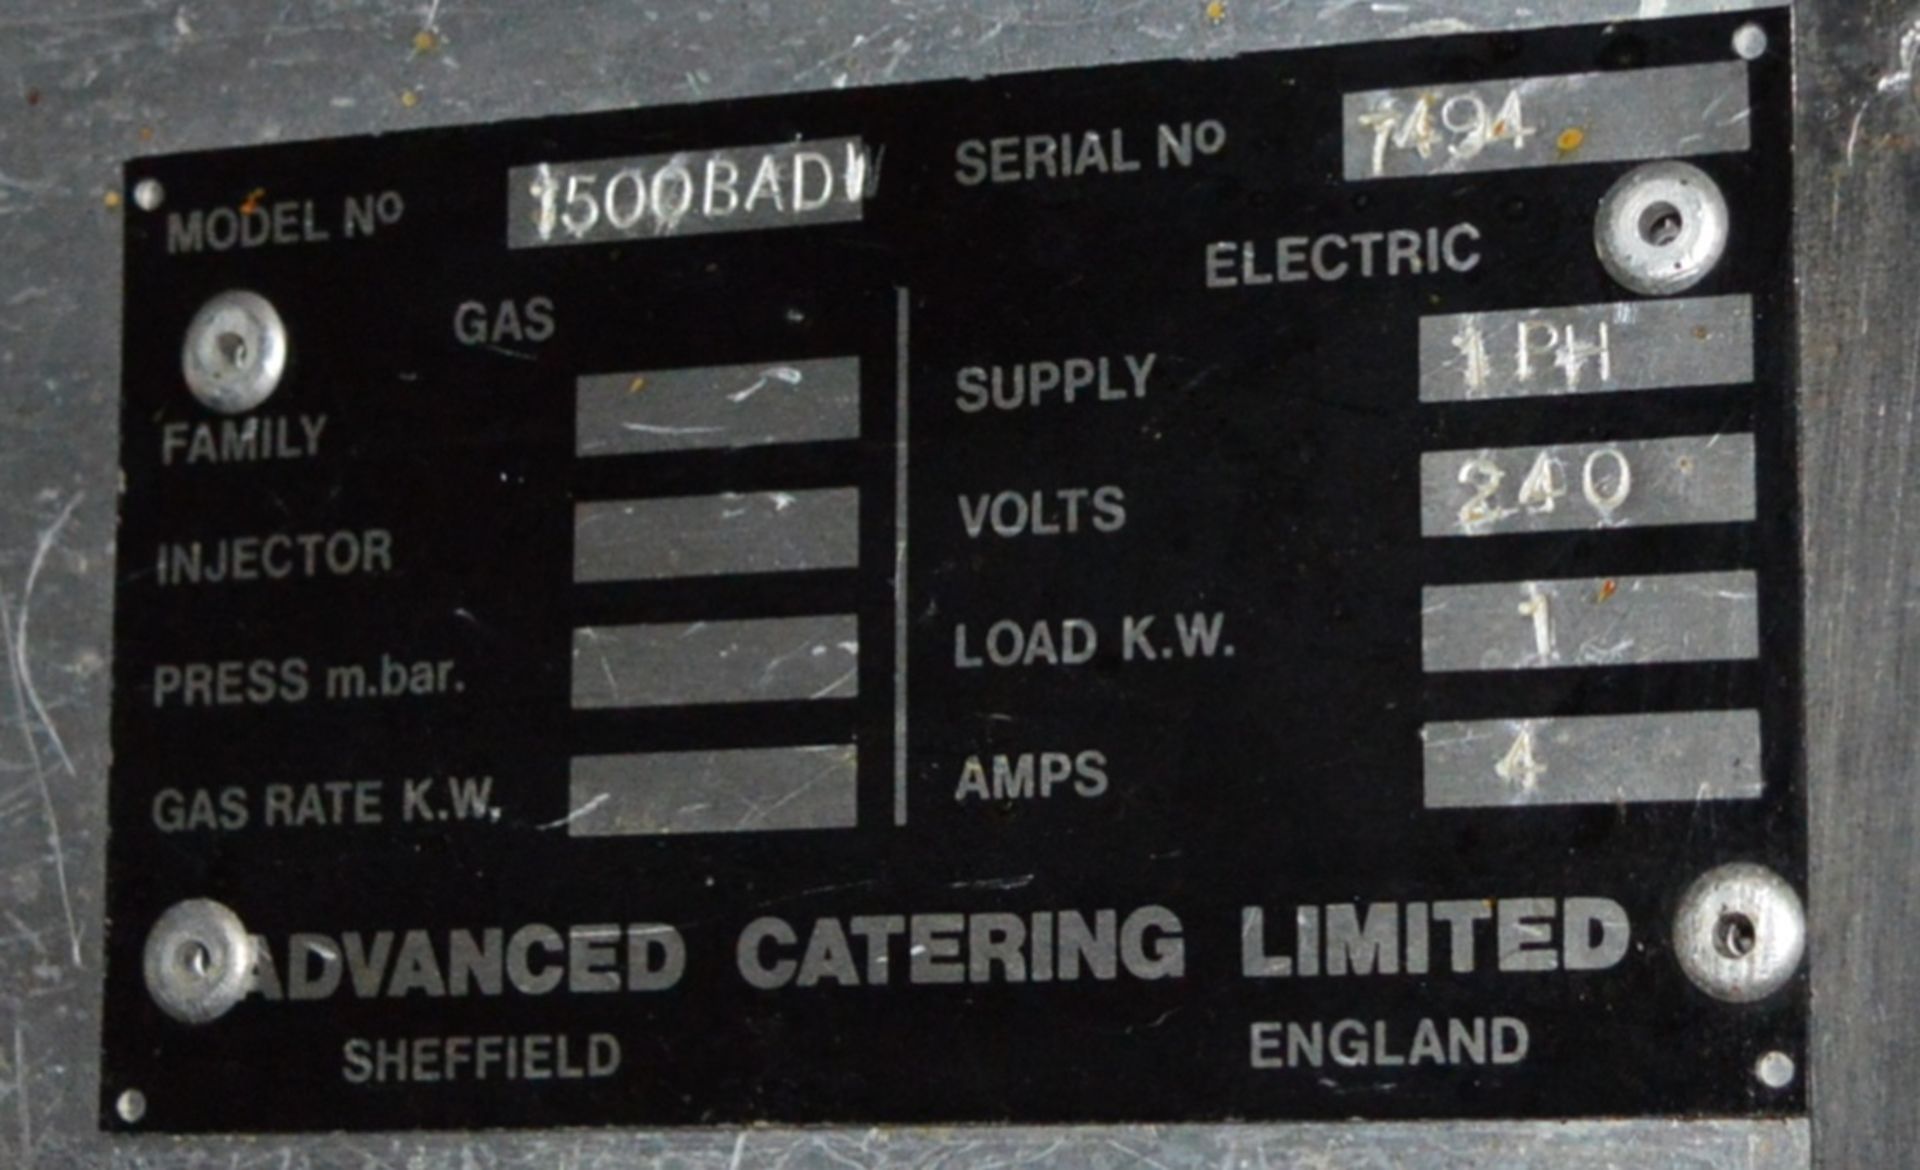 1 x Advanced Catering Equipment 1500BADW 240V Chilled Counter - Details to follow - Ref: FJC011 - - Image 9 of 10